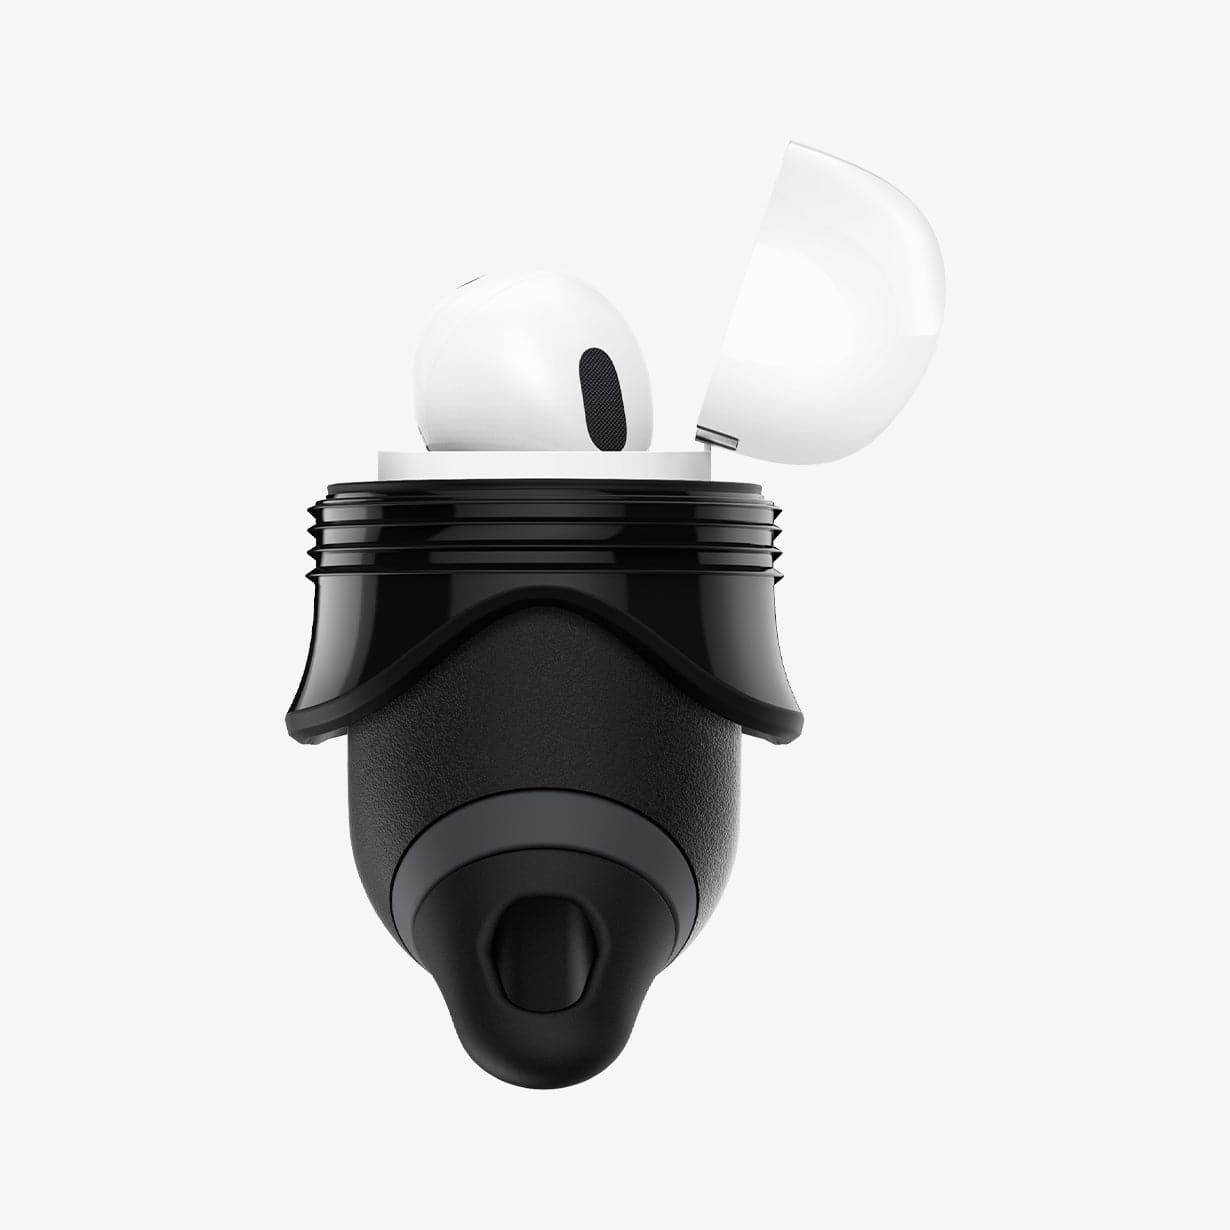 ASD00542 - Apple AirPods Pro / AirPods Pro 2 Case Slim Armor IP in black showing the side with two flaps pulled down and AirPods inside